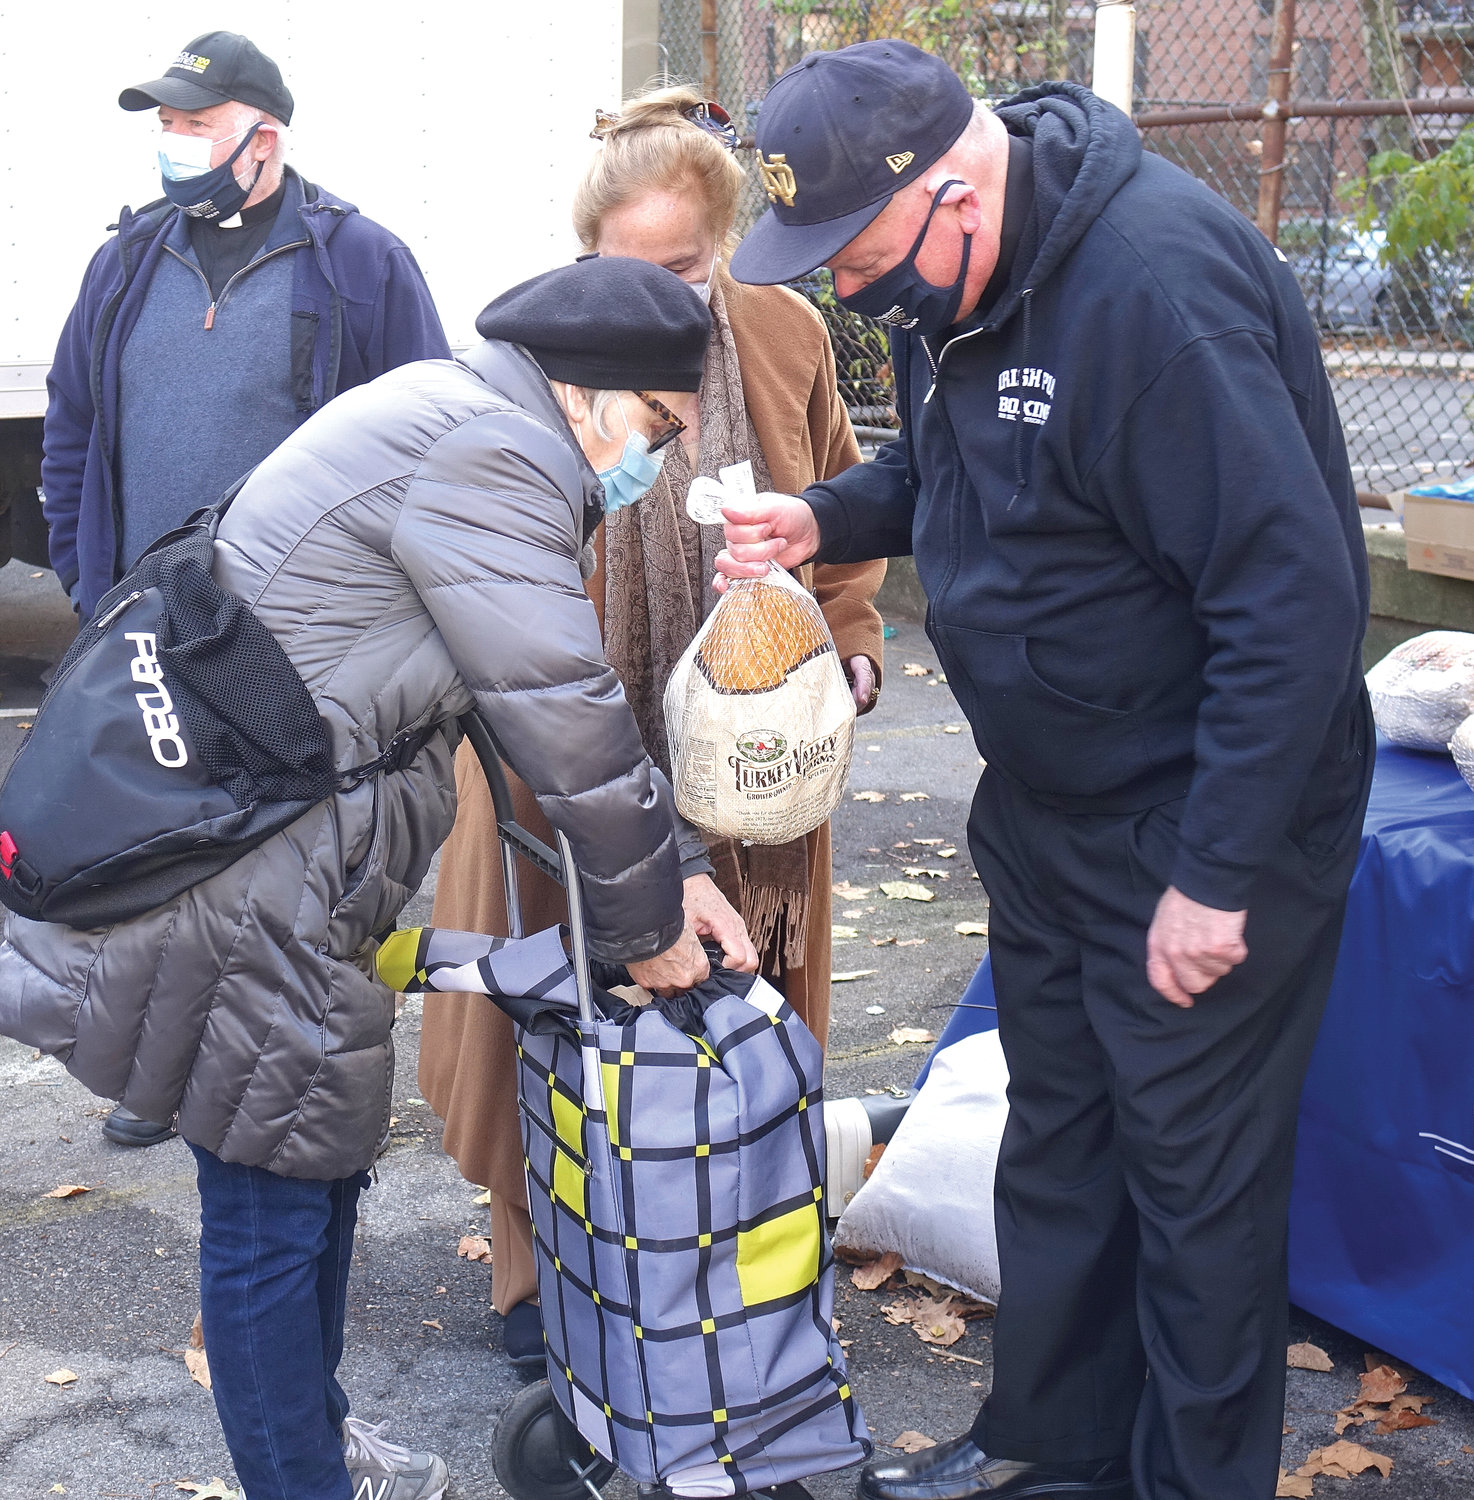 THANKSGIVING BLESSING—Cardinal Dolan was present to distribute some of the 500 turkeys given away Nov. 24 outside the Lt. Joseph P. Kennedy Community Center in Harlem. Also distributed with each turkey were a selection of other foods, including rice, beans and stuffing. The gathering was organized by archdiocesan Catholic Charities.